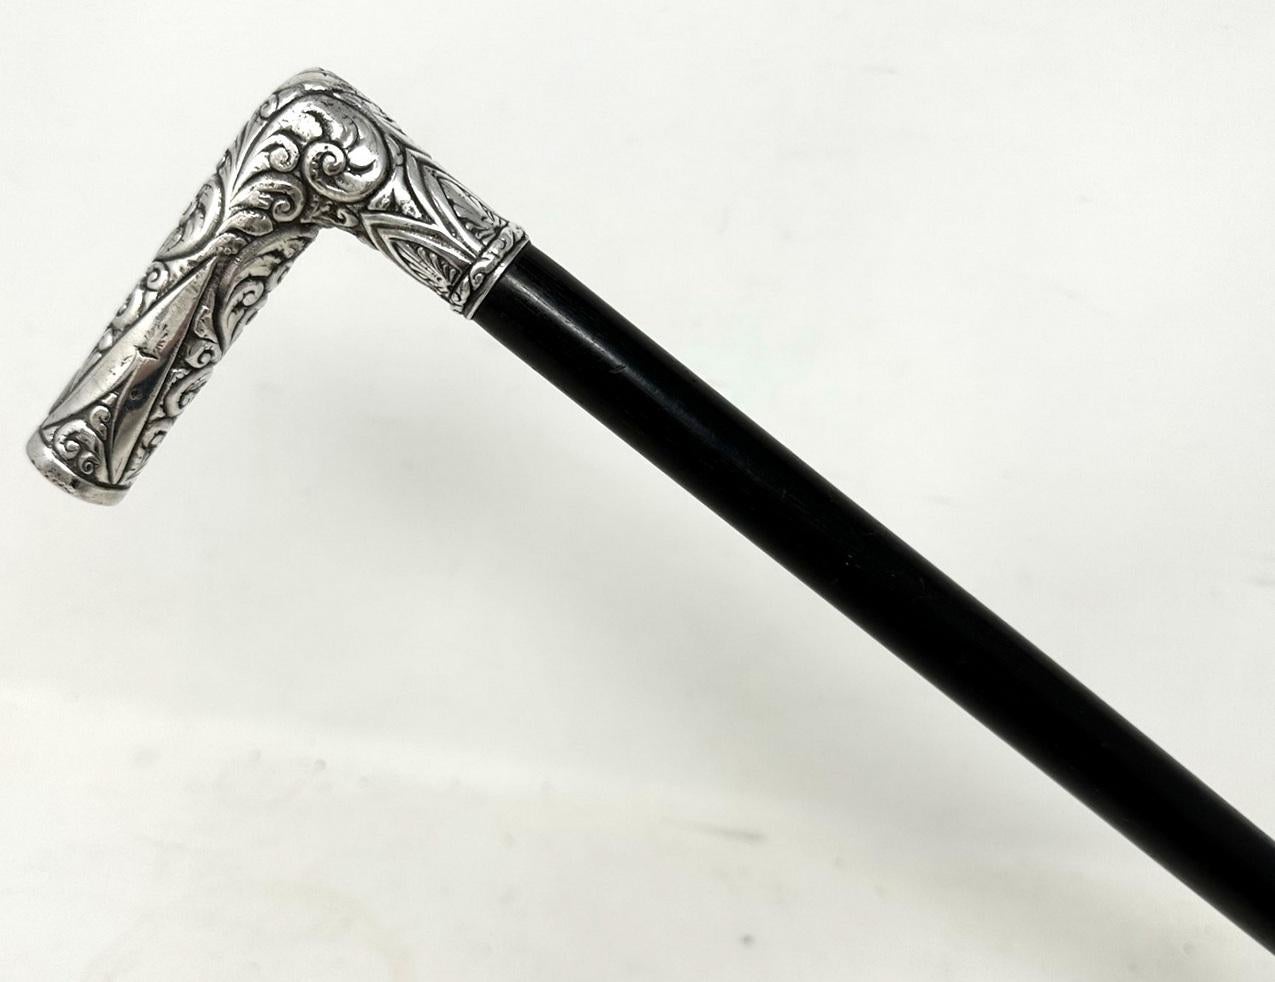 An absolutely stunning Lady's or Gentleman's Walking Cane of English origin and of exceptional quality. Manufactured and retailed by the famous Store James Smith & Sons located in Oxford Street, London. 

The ornate “L” shaped Sterling silver handle